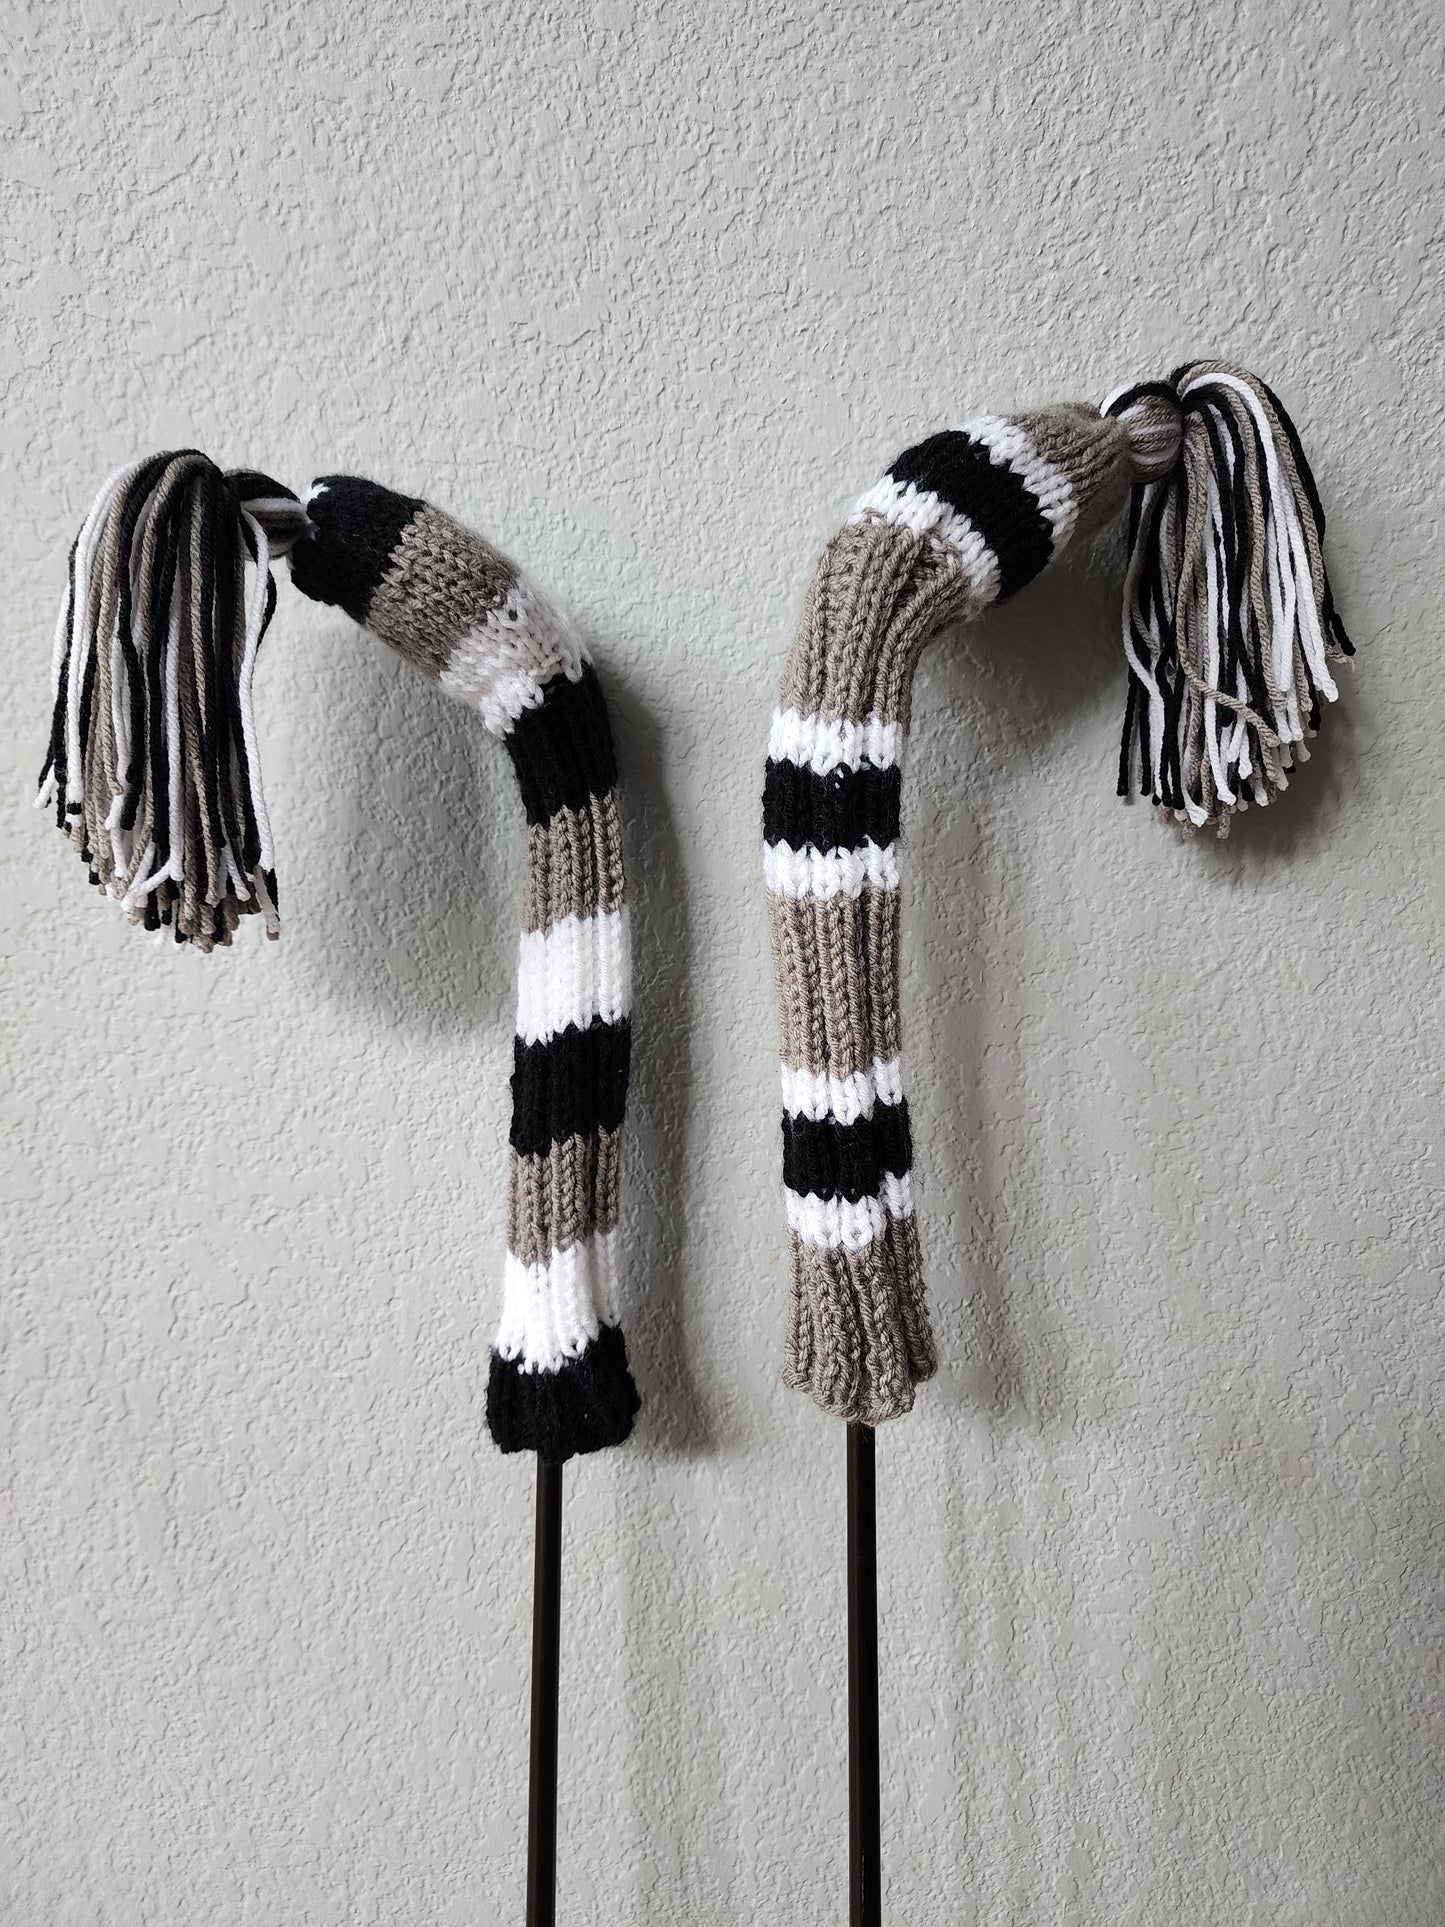 Two Golf Club Head Covers Retro-Vintage Black, Gray & White with Pom Poms for Drivers, Woods